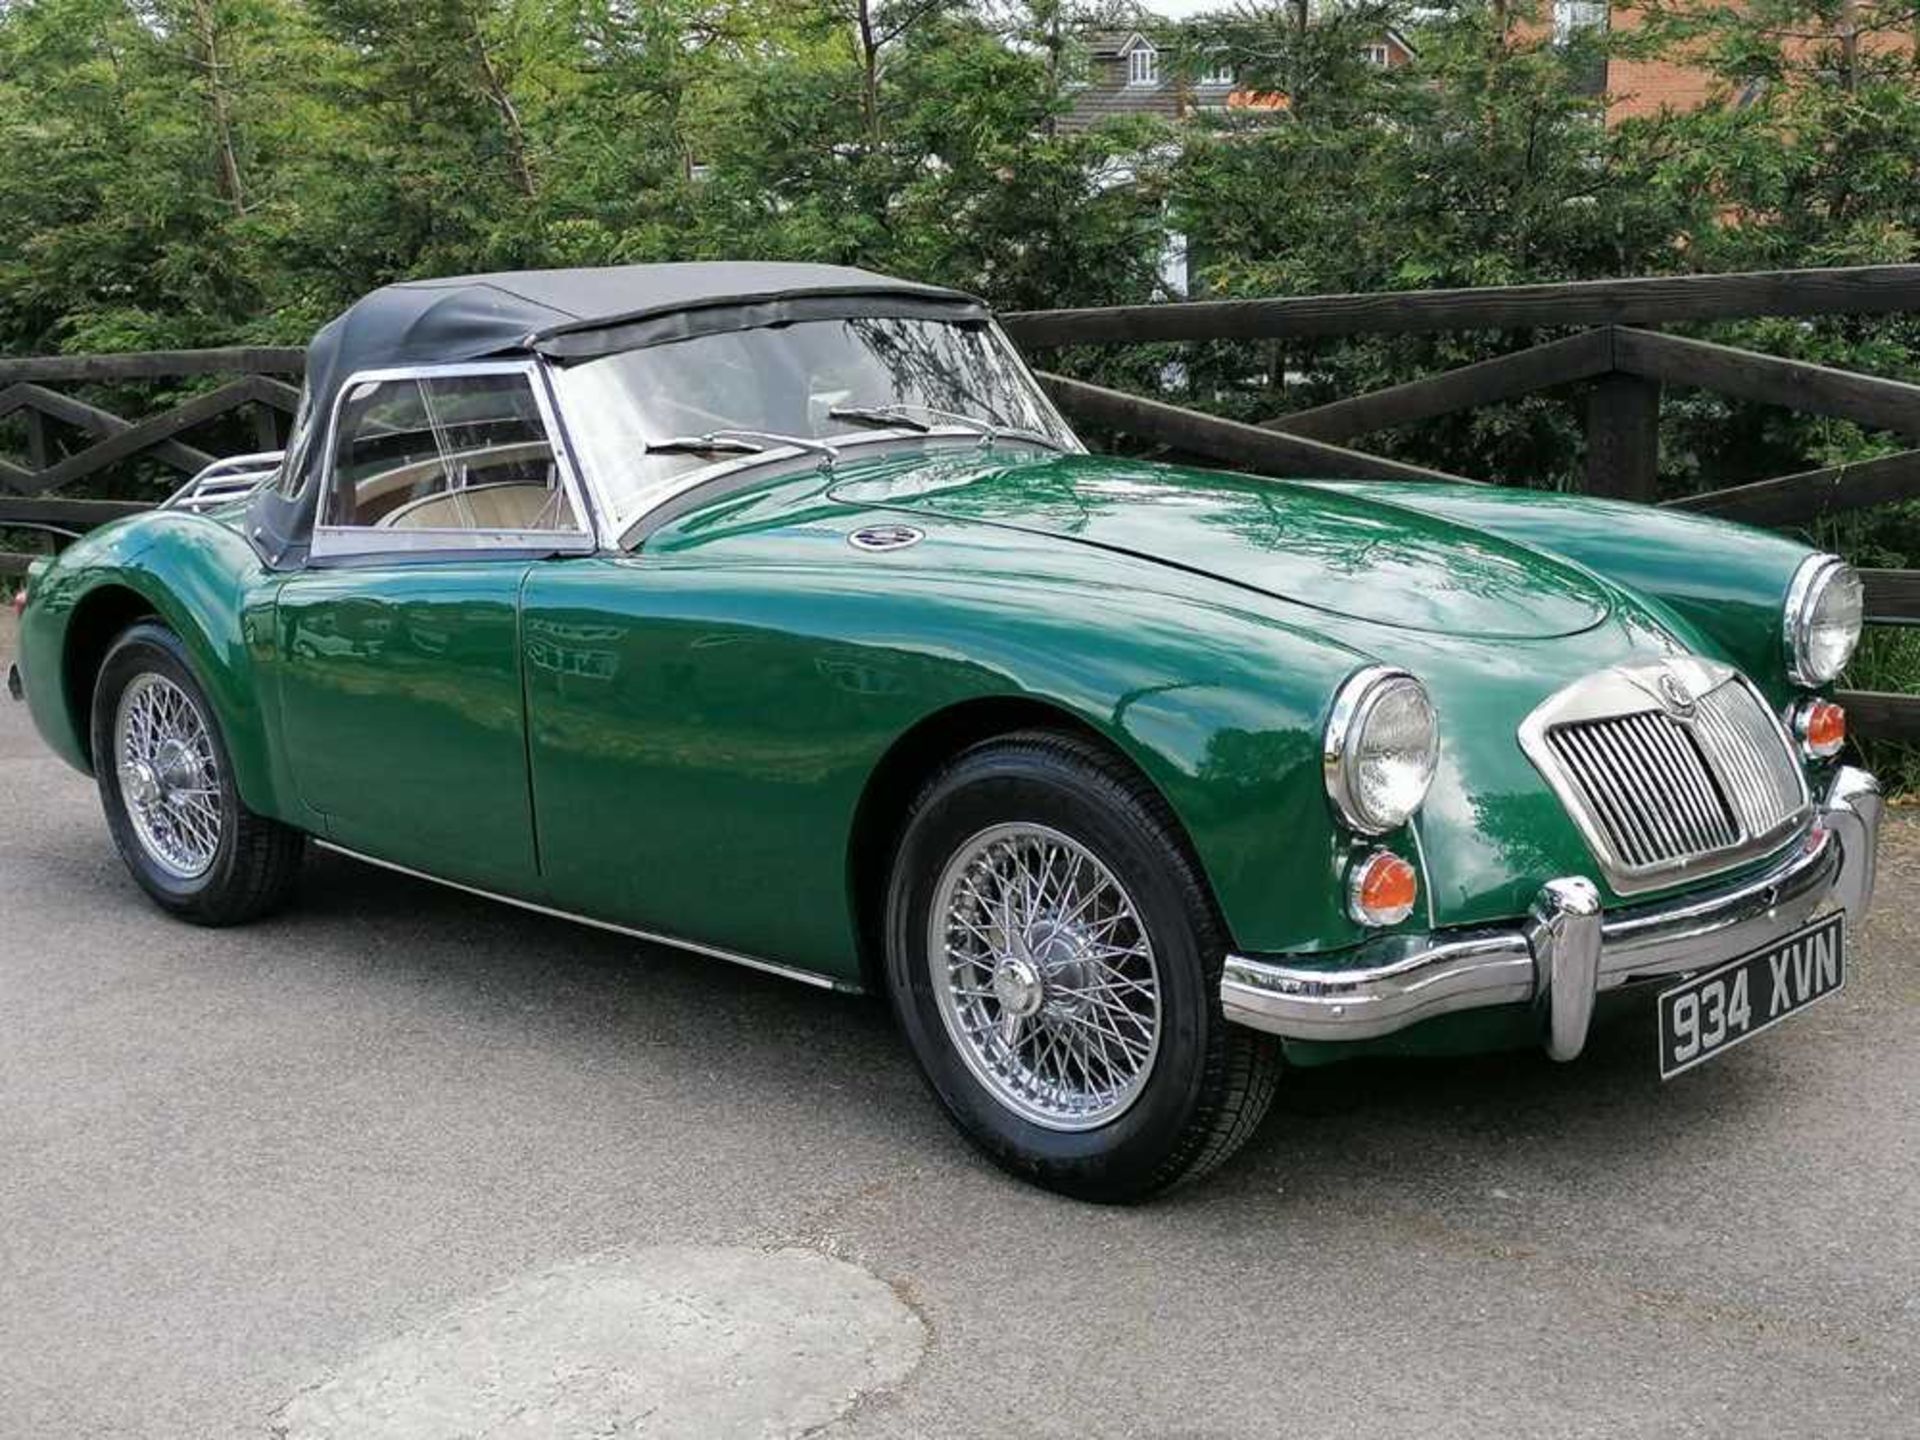 1960 MG A Roadster - Image 4 of 8